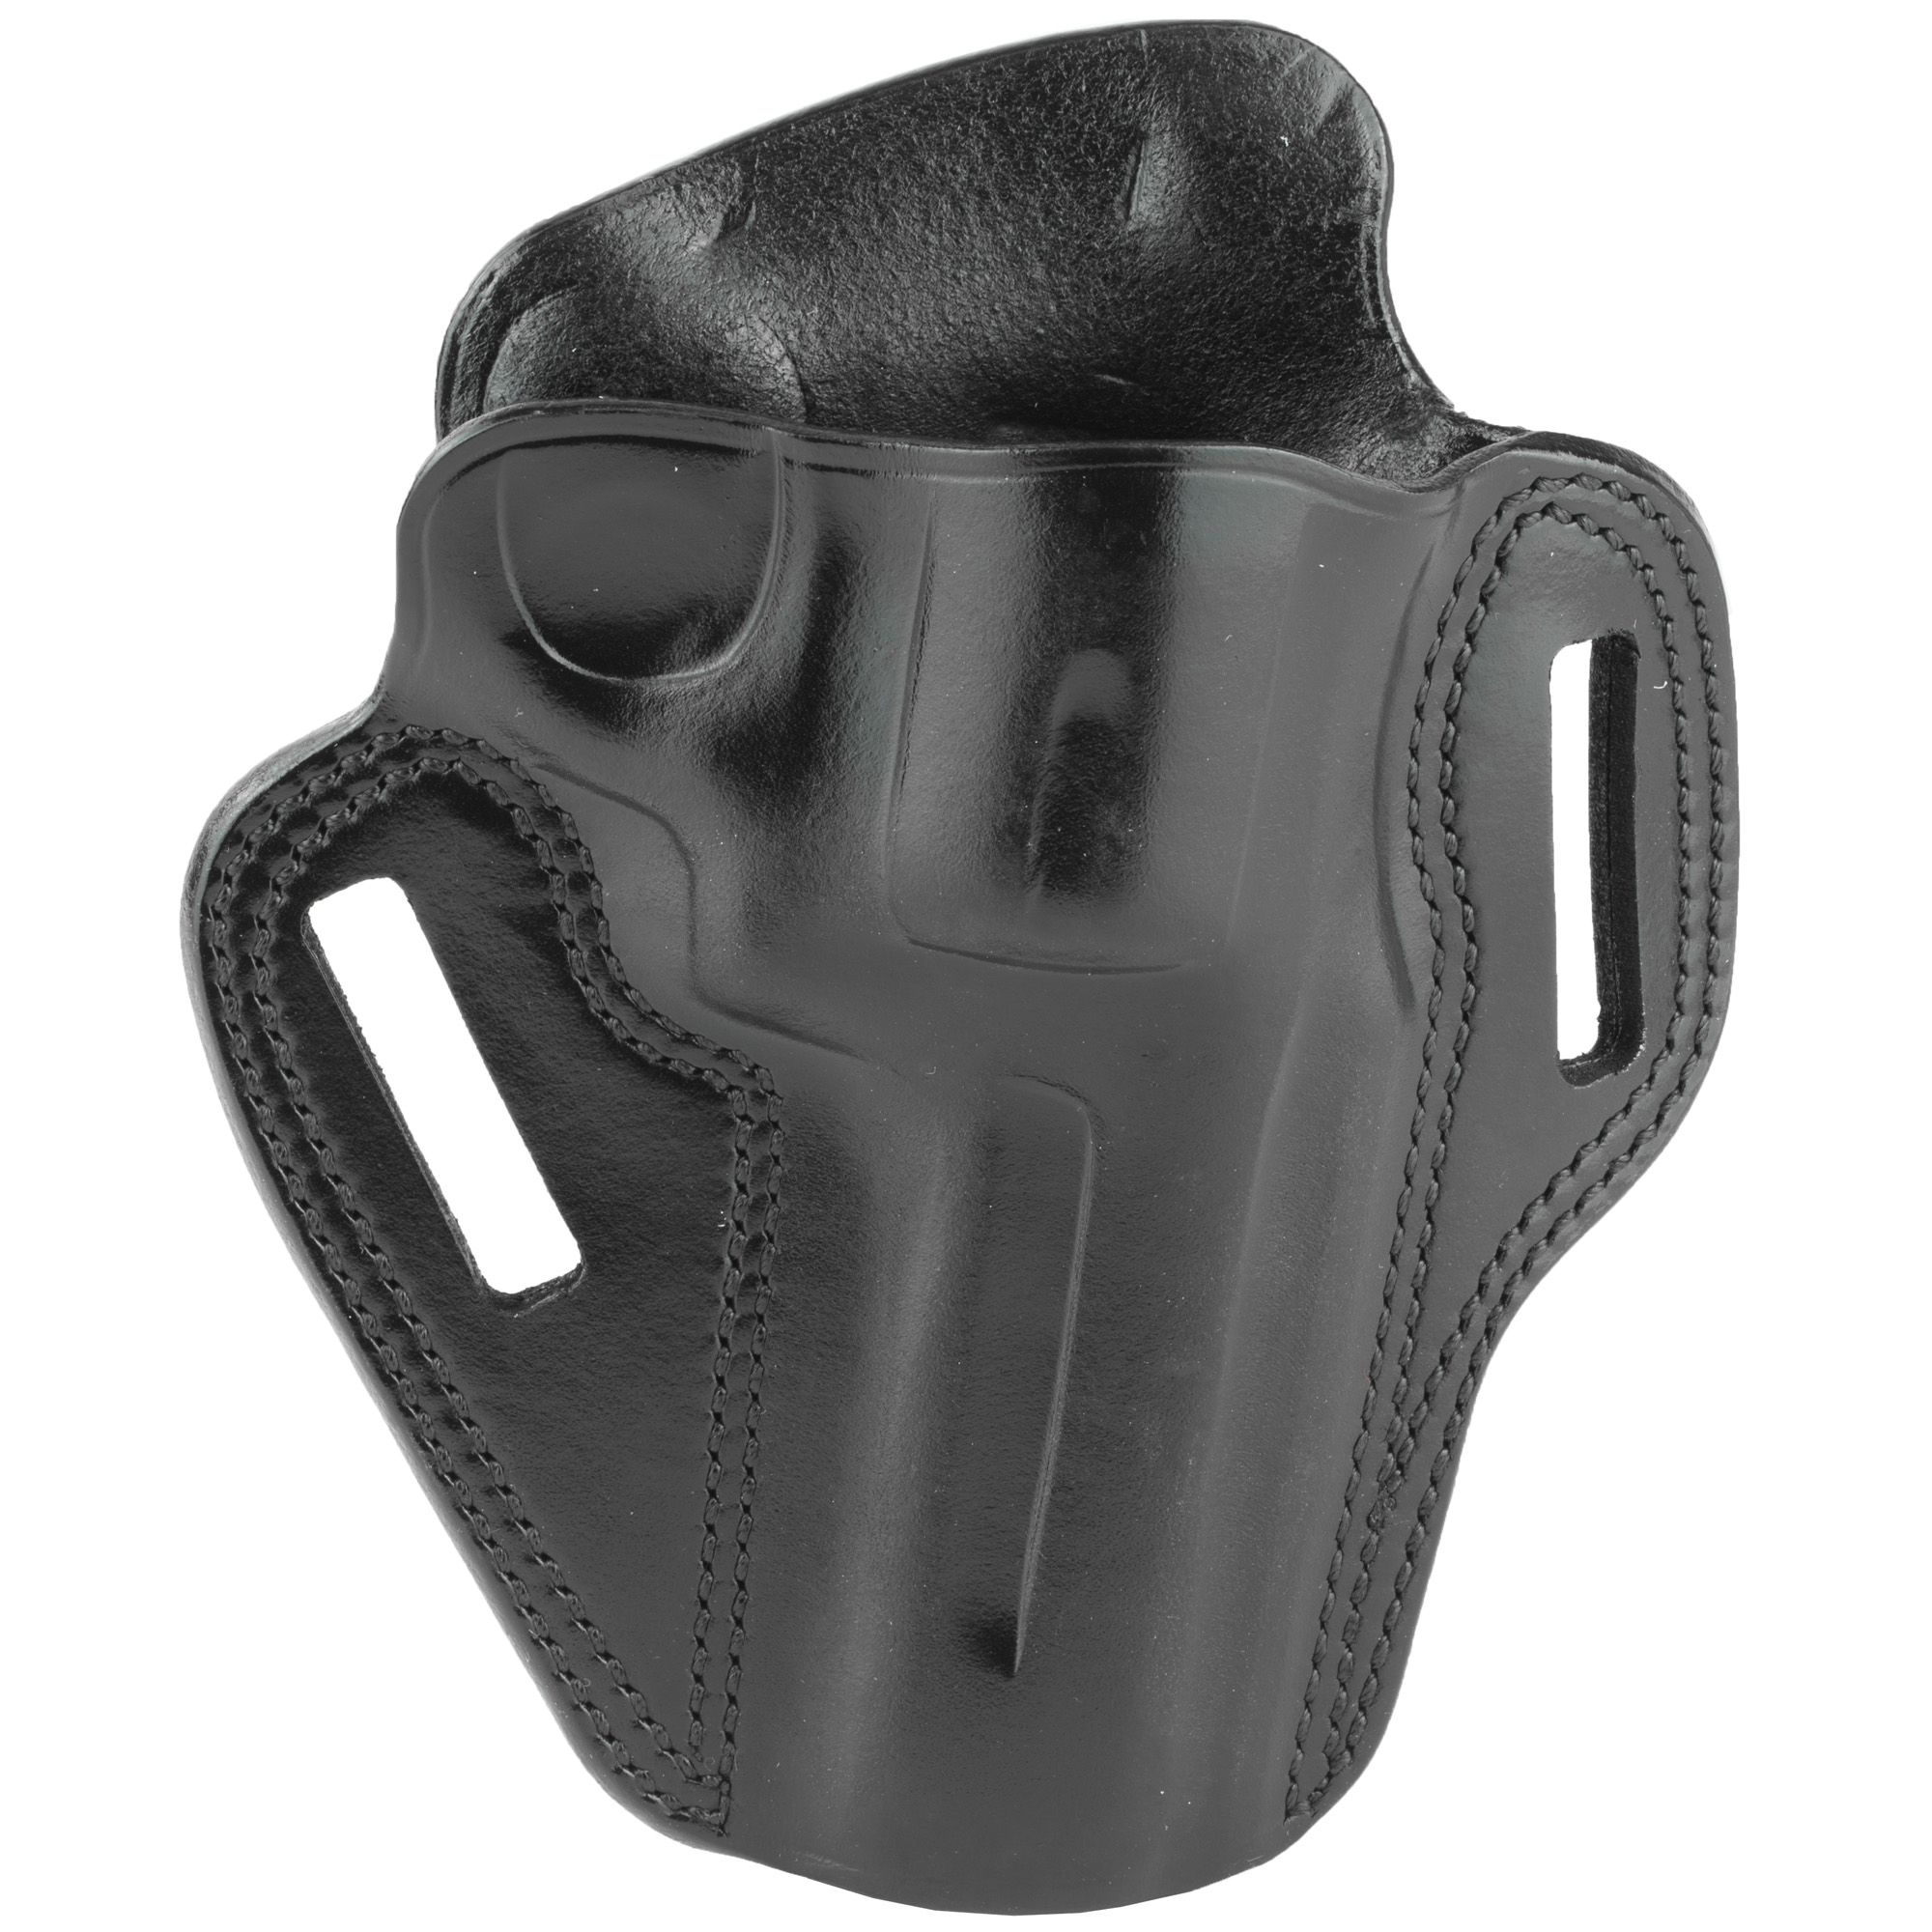 Galco Combat Master Concealment Holster - Right Hand Black S&W L Fr 4 : CM104B